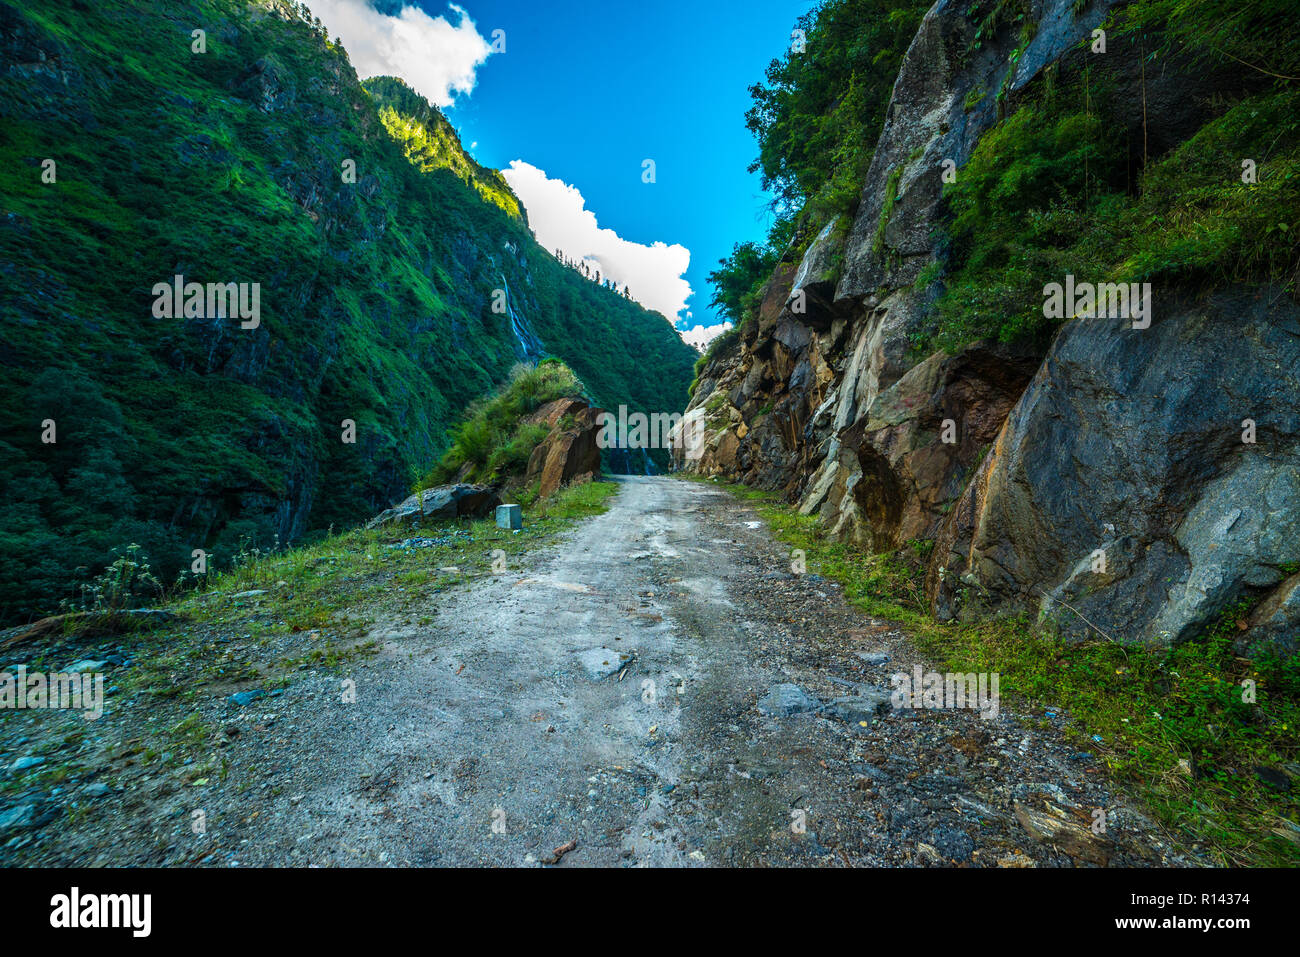 Man Standing Over Rock with Nature of Nubra Valley Stock Image - Image of  ladakh, calm: 179125587